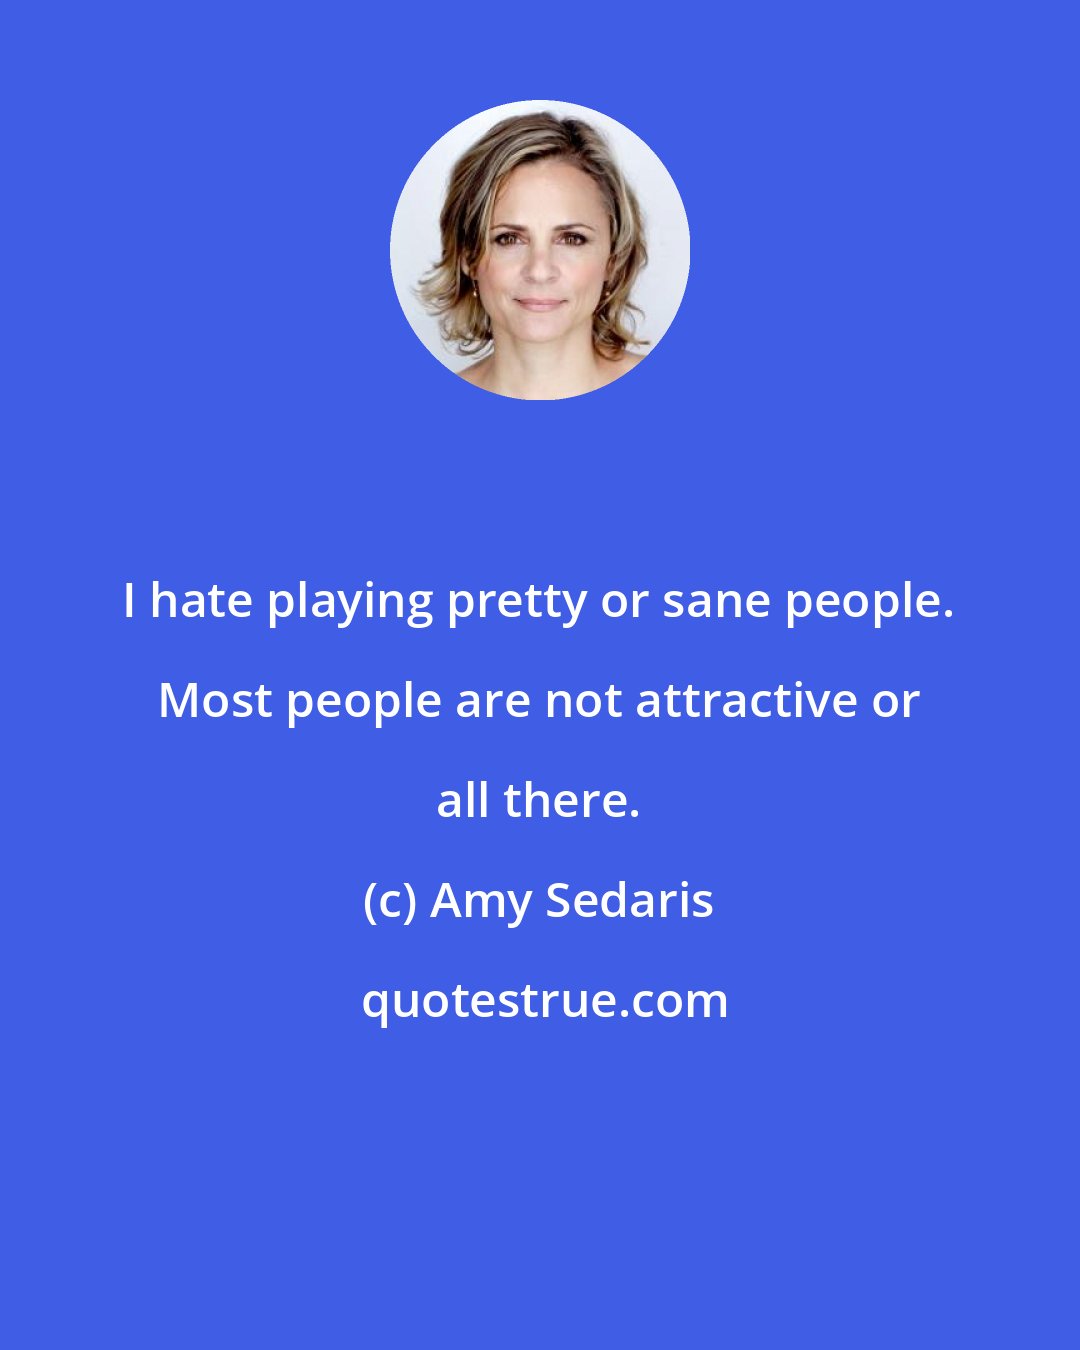 Amy Sedaris: I hate playing pretty or sane people. Most people are not attractive or all there.